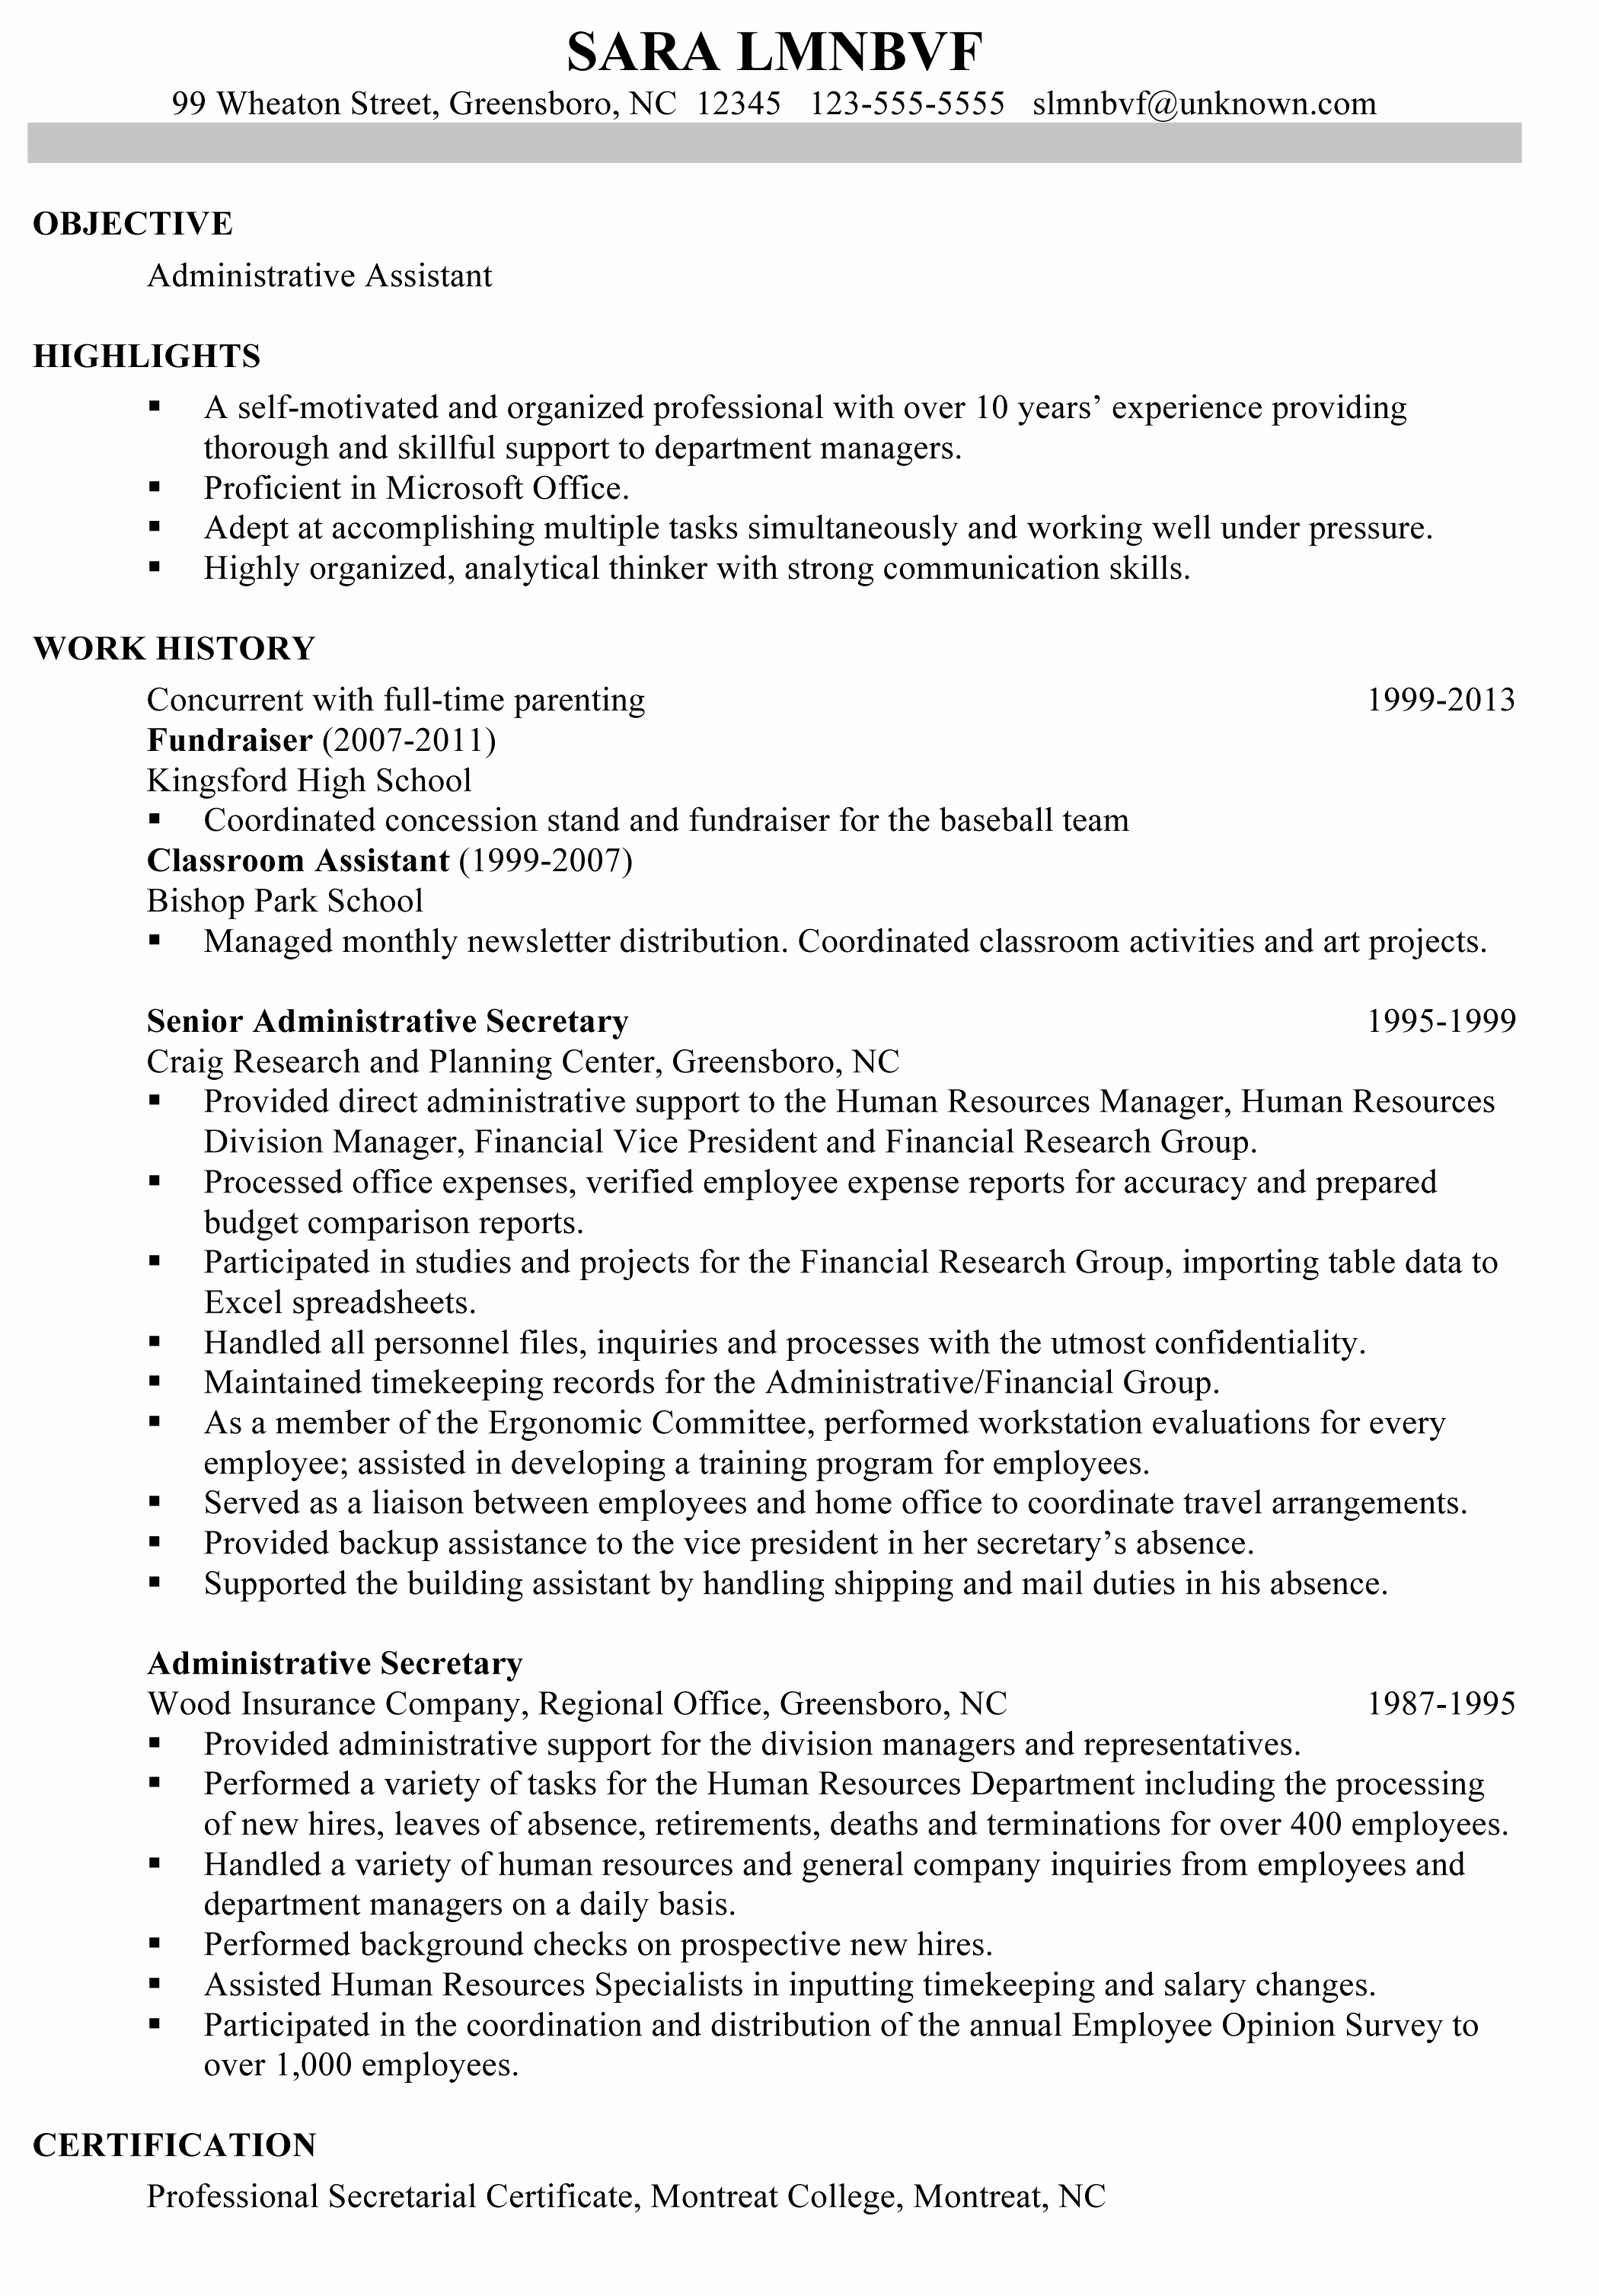 Resume Sample for An Administrative assistant Susan